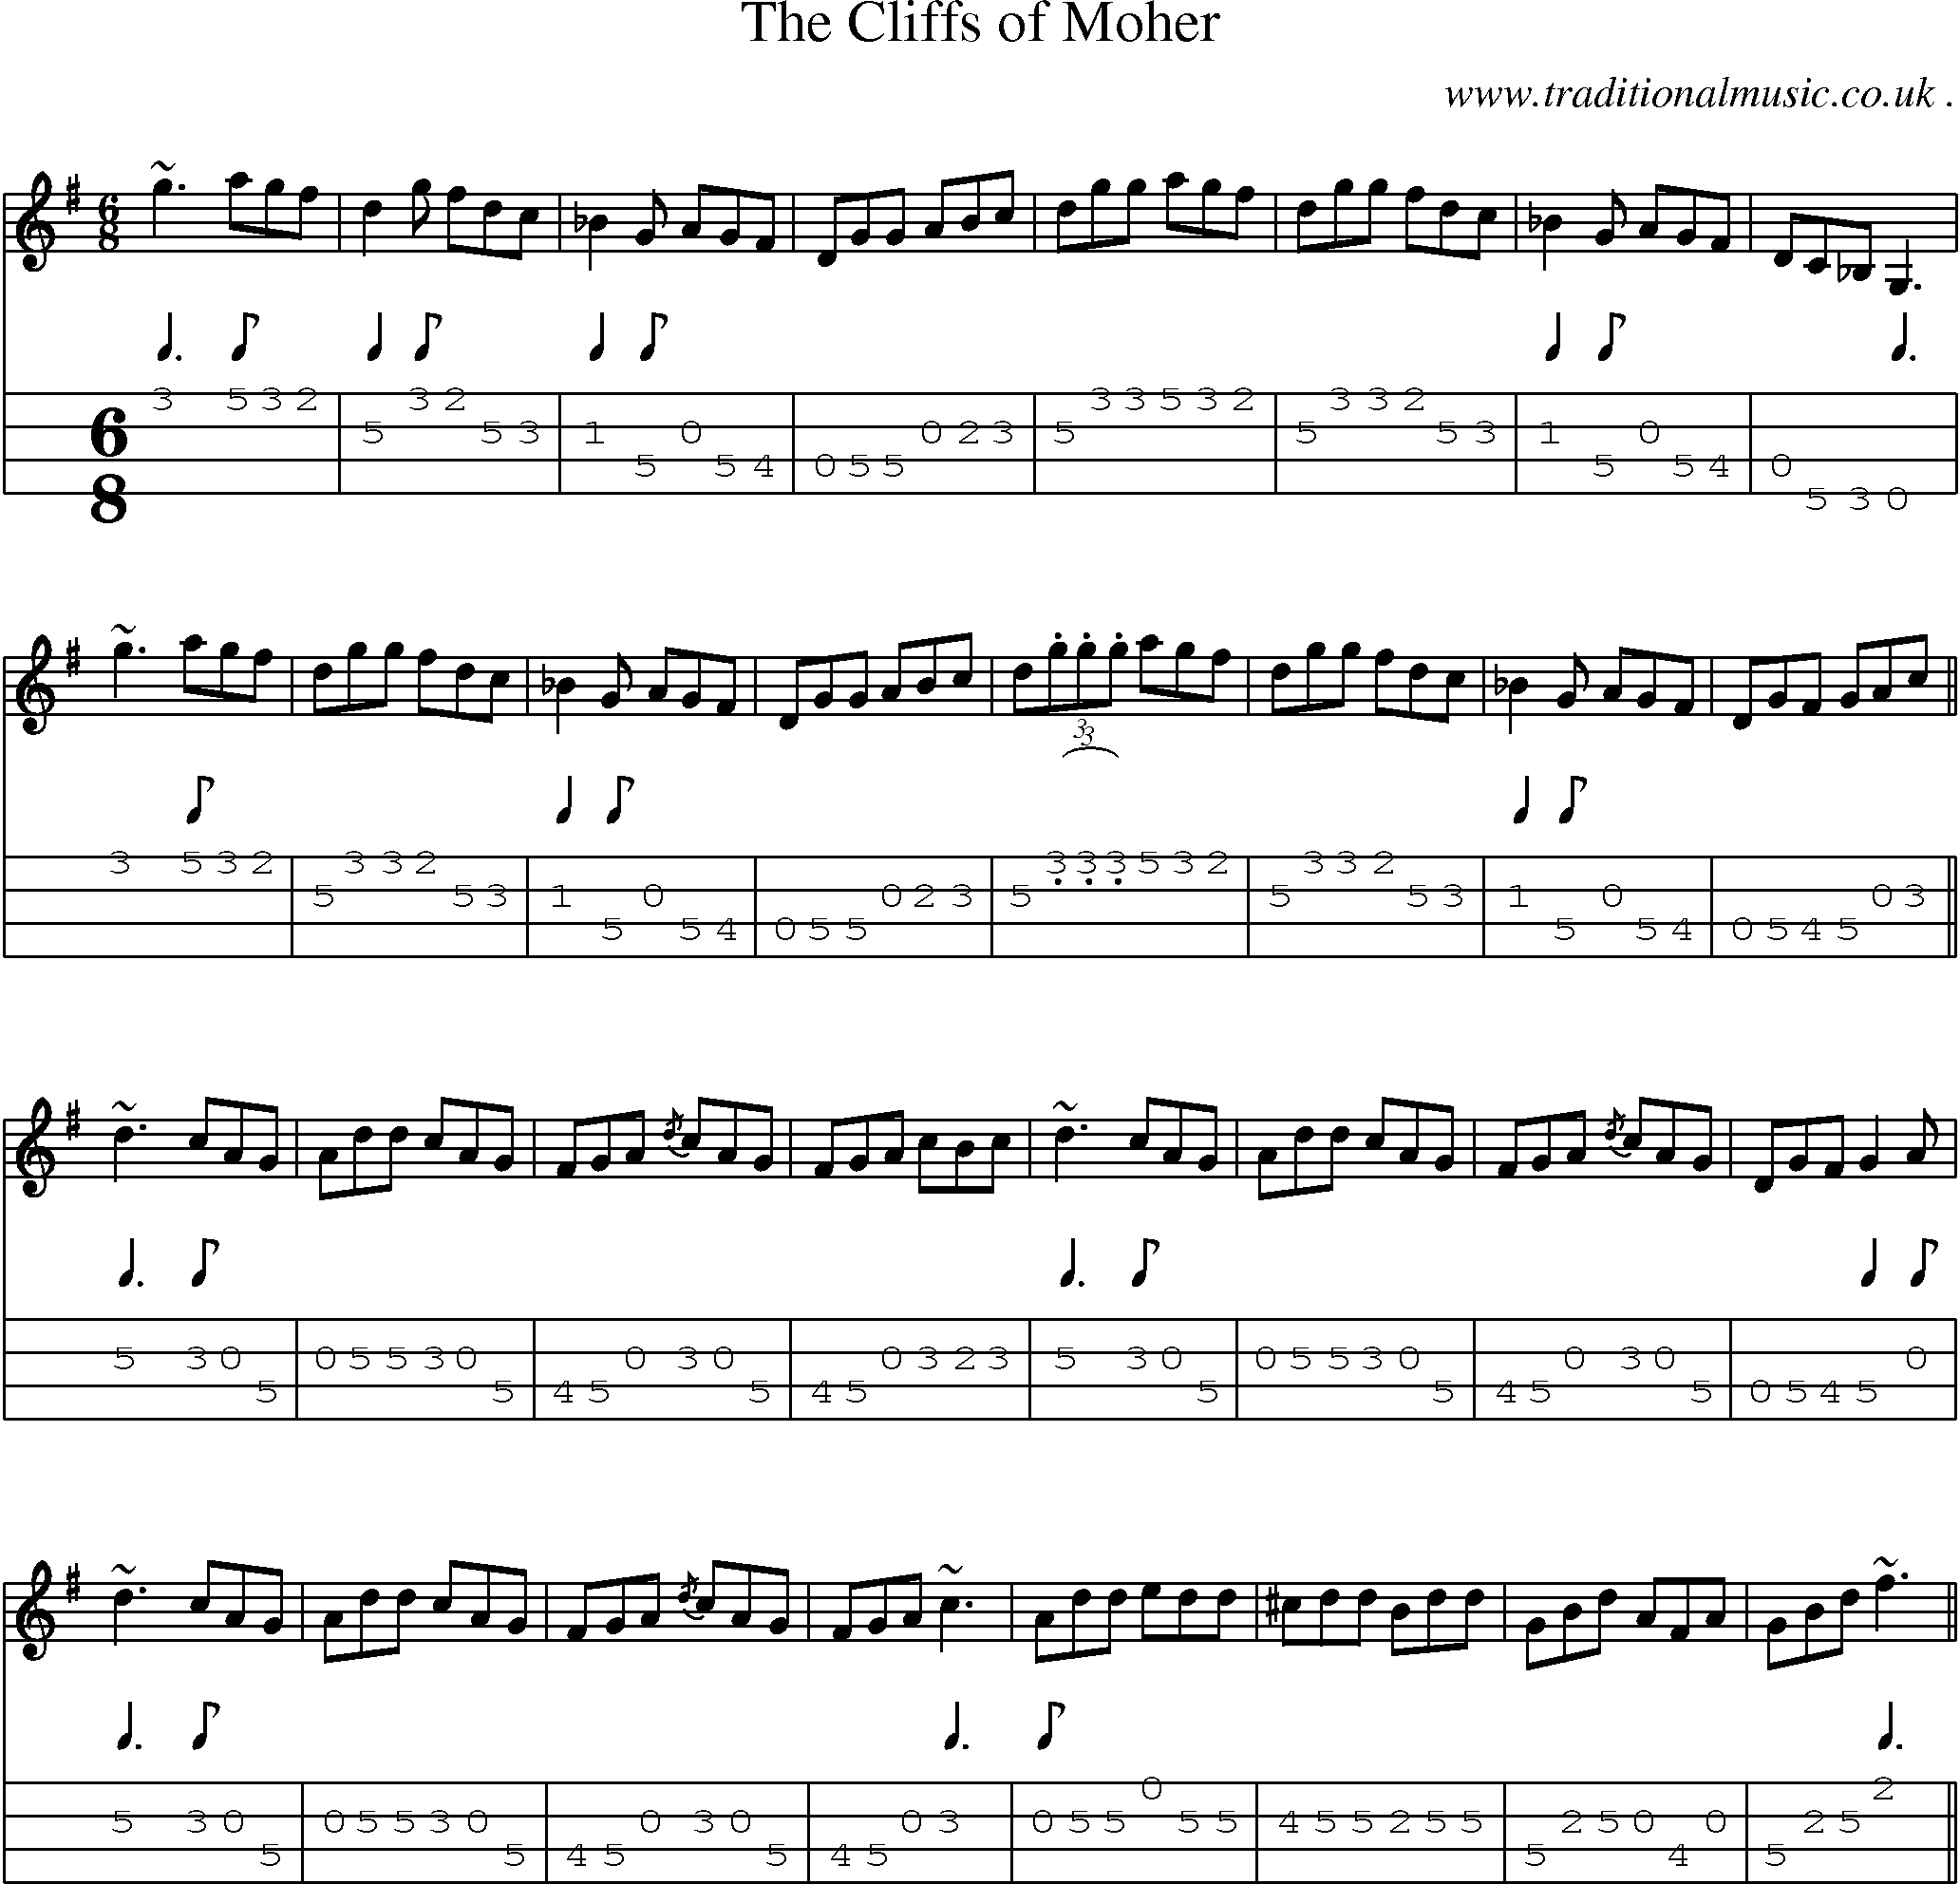 Sheet-music  score, Chords and Mandolin Tabs for The Cliffs Of Moher